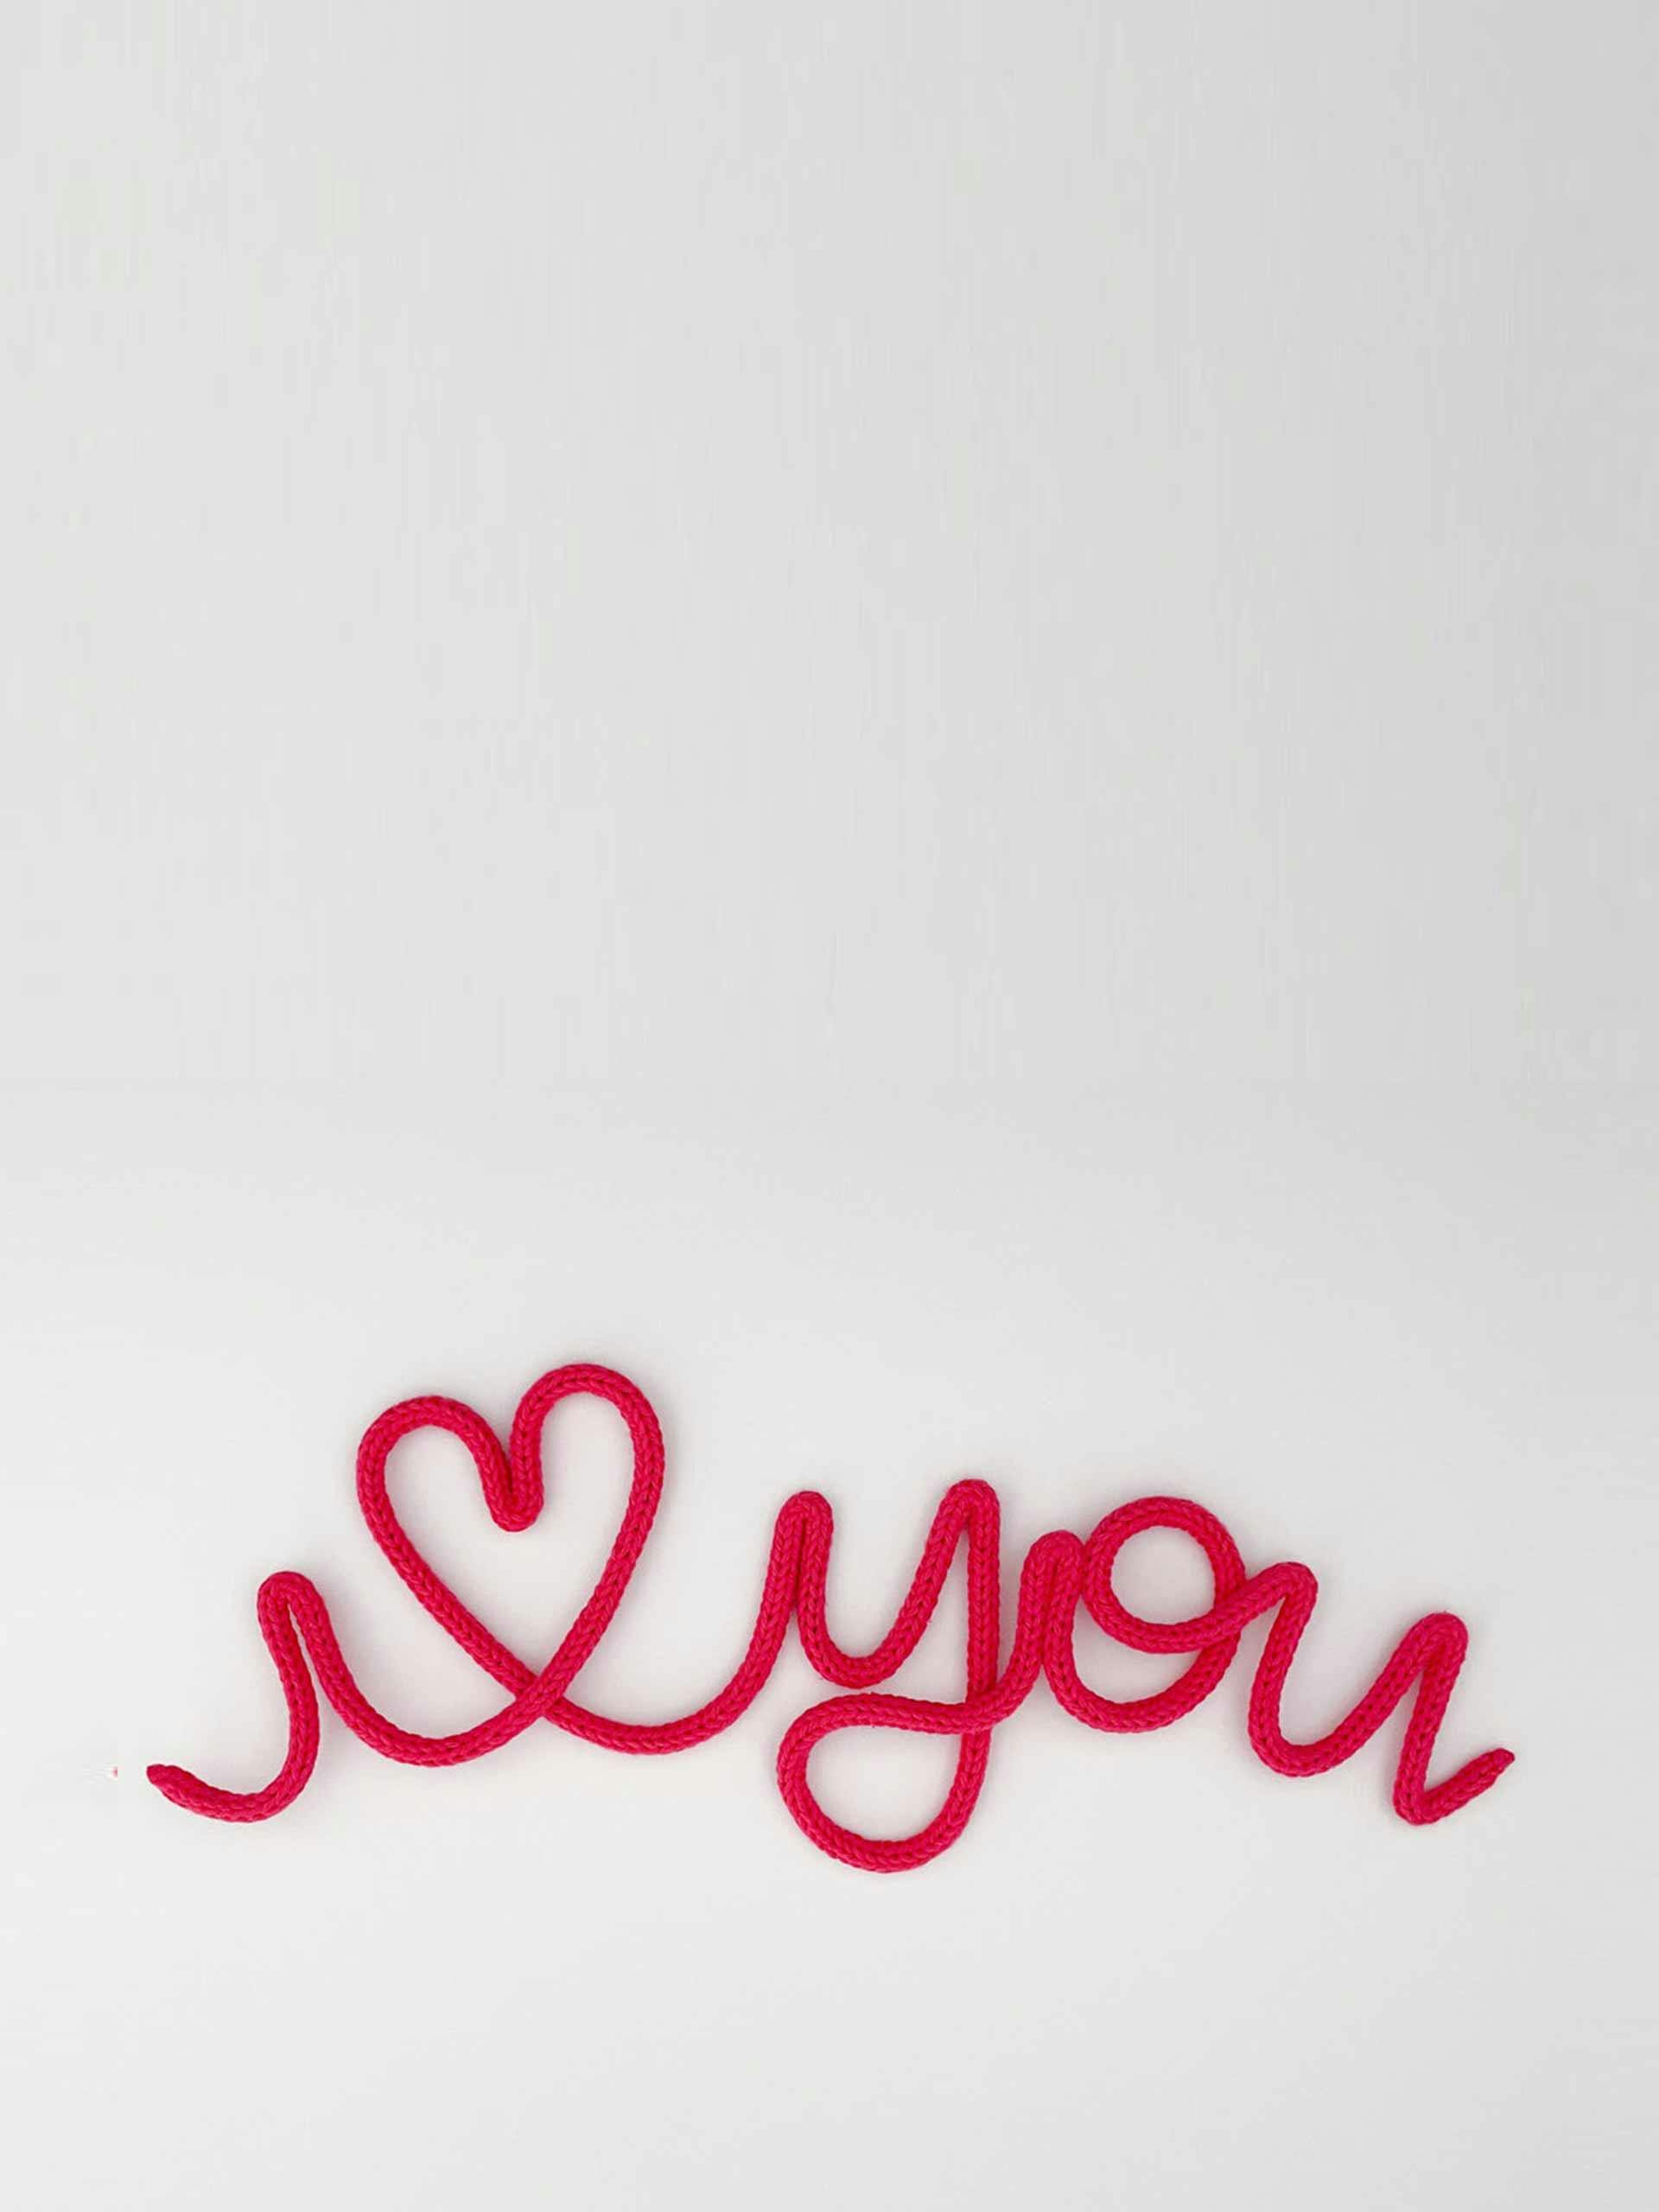 “I Heart You” cotton-wire wall sign